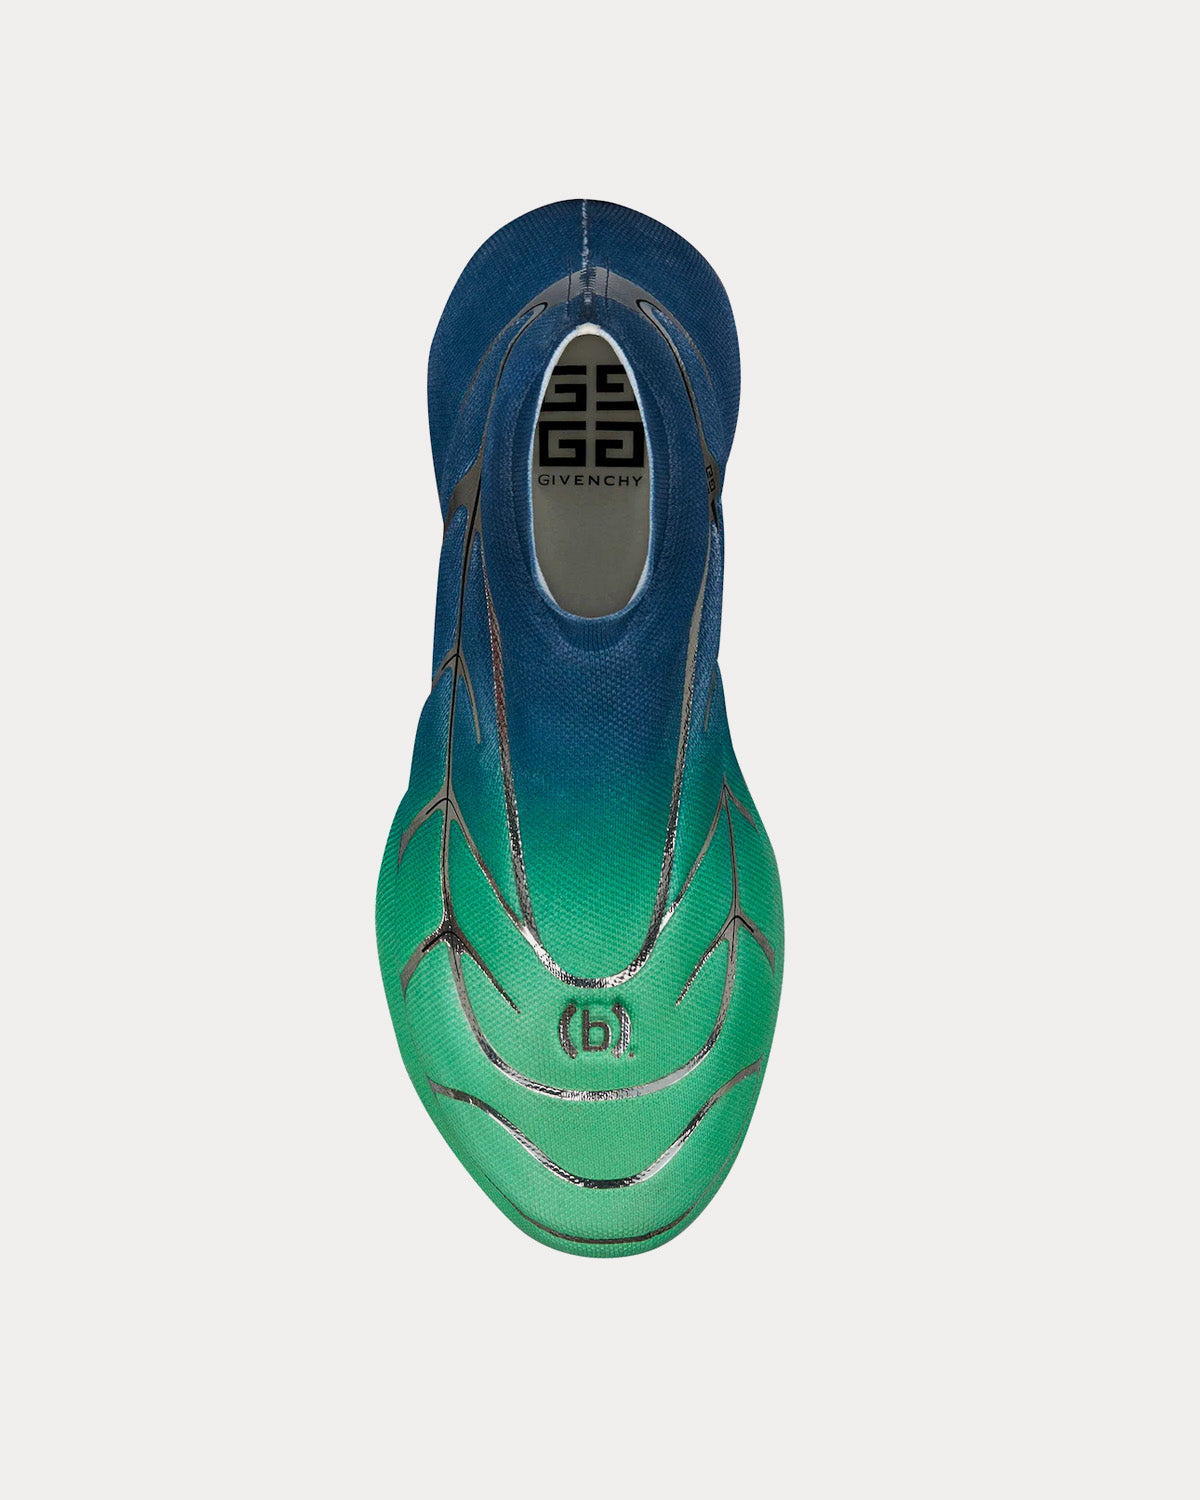 Givenchy x BSTROY TK-360+ Mid Mesh Blue / Green Slip On Sneakers 